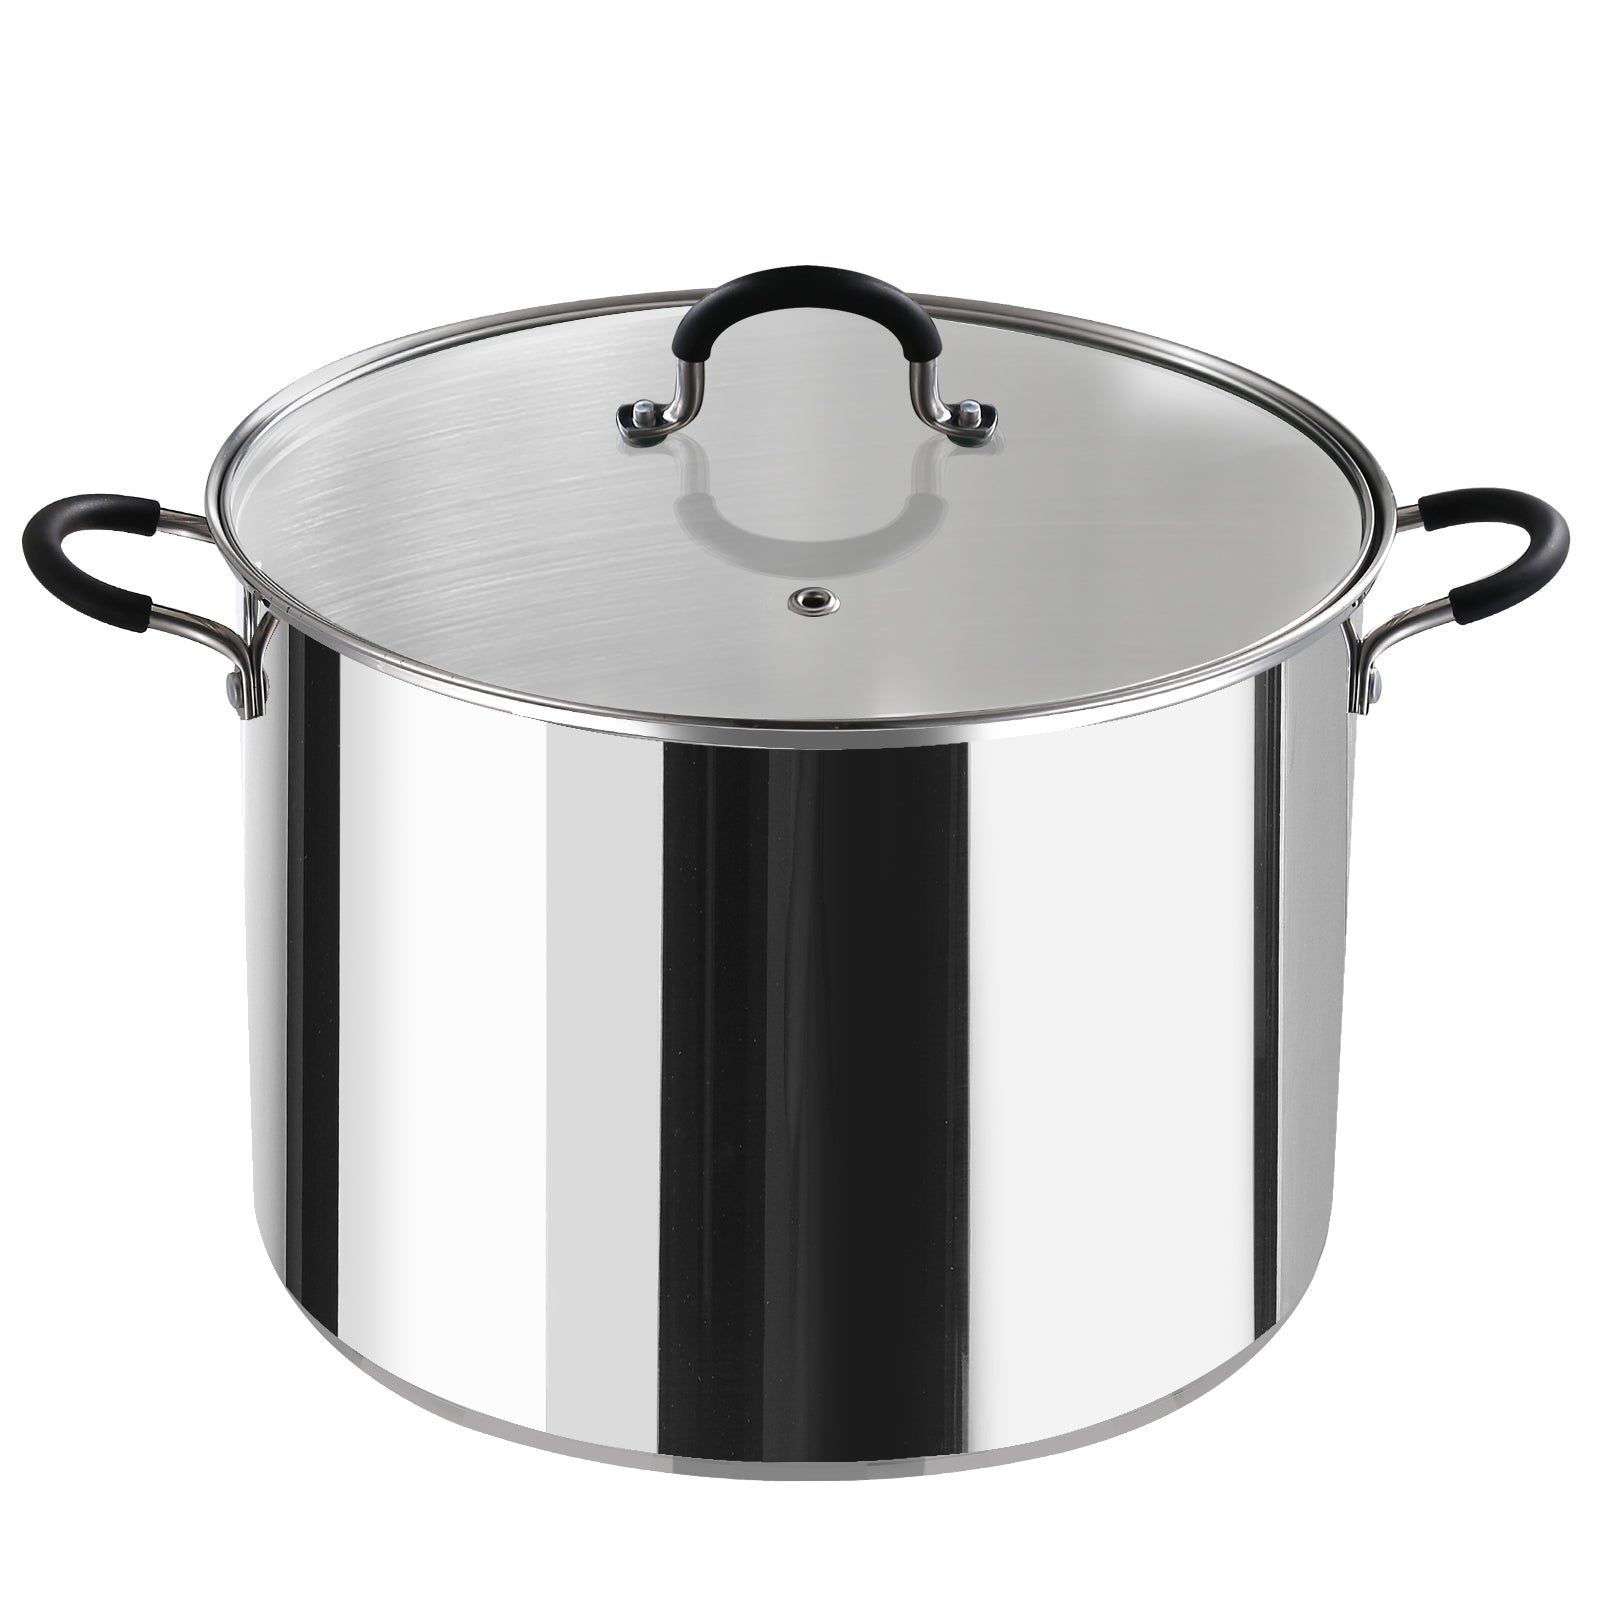 Cooks Standard 18/10 Stainless Steel Stockpot 8-Quart, Classic Deep Cooking  Pot Canning Cookware with Stainless Steel Lid, Silver